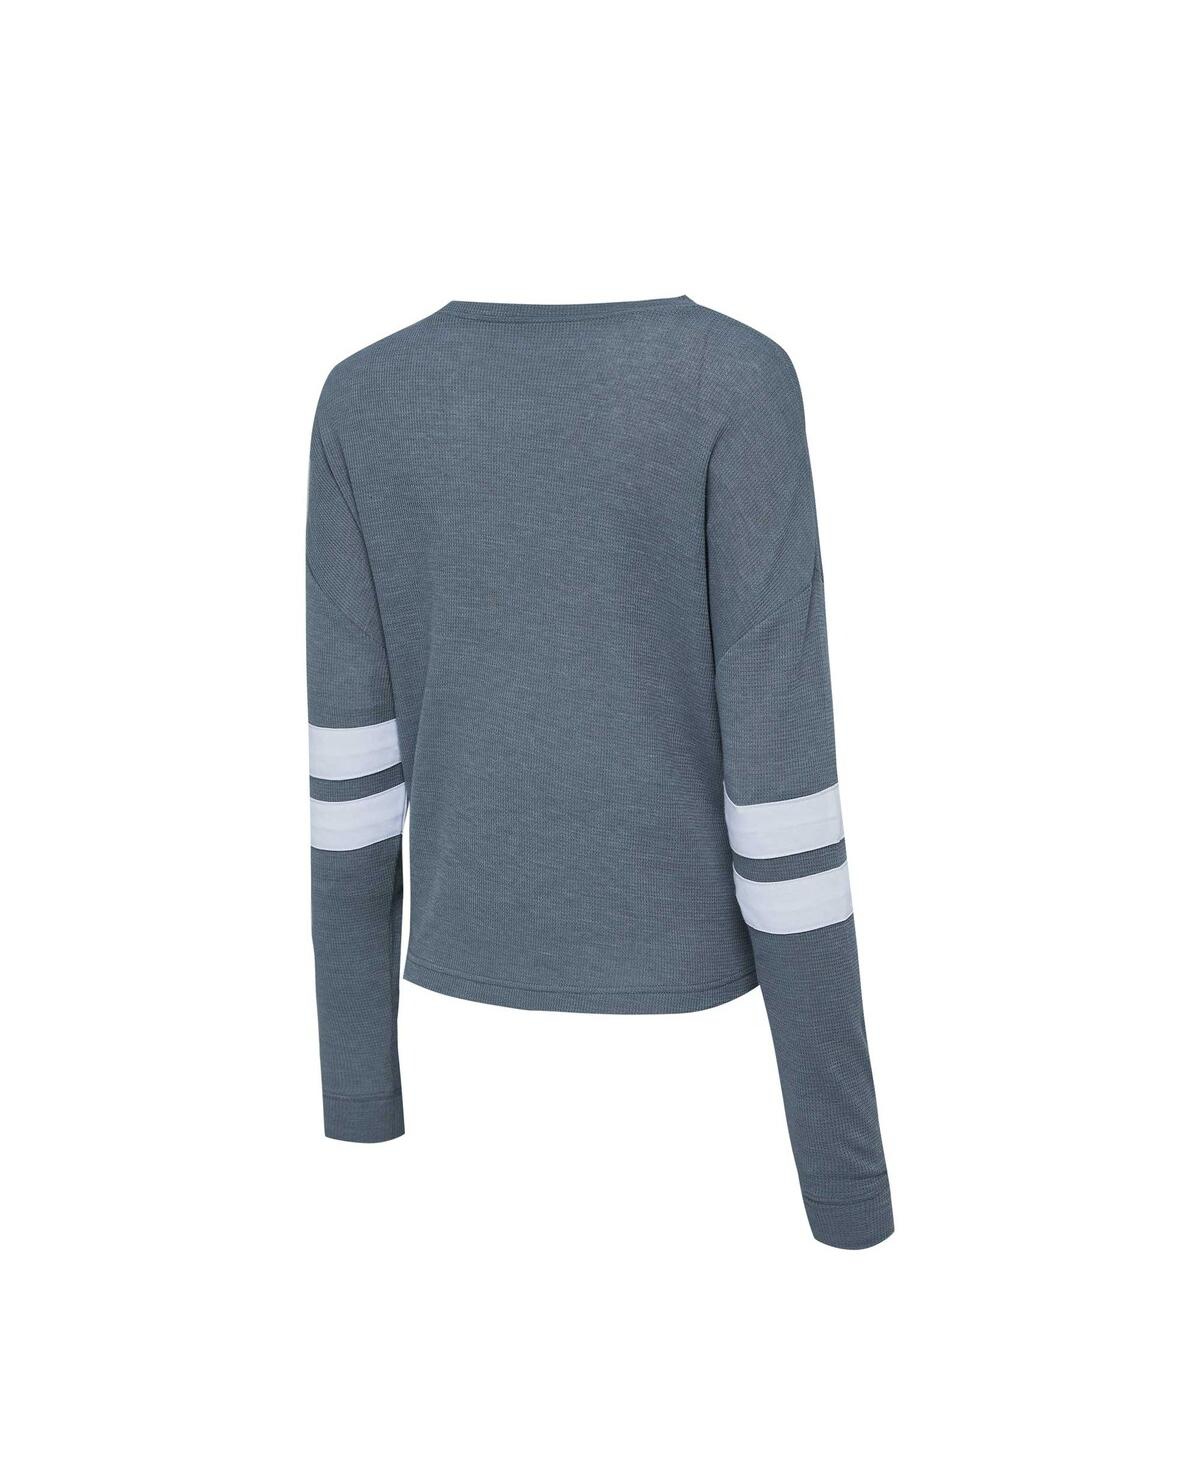 Shop Concepts Sport Women's  Gray Distressed Toronto Maple Leafs Meadowâ Long Sleeve T-shirt And Shorts Sl